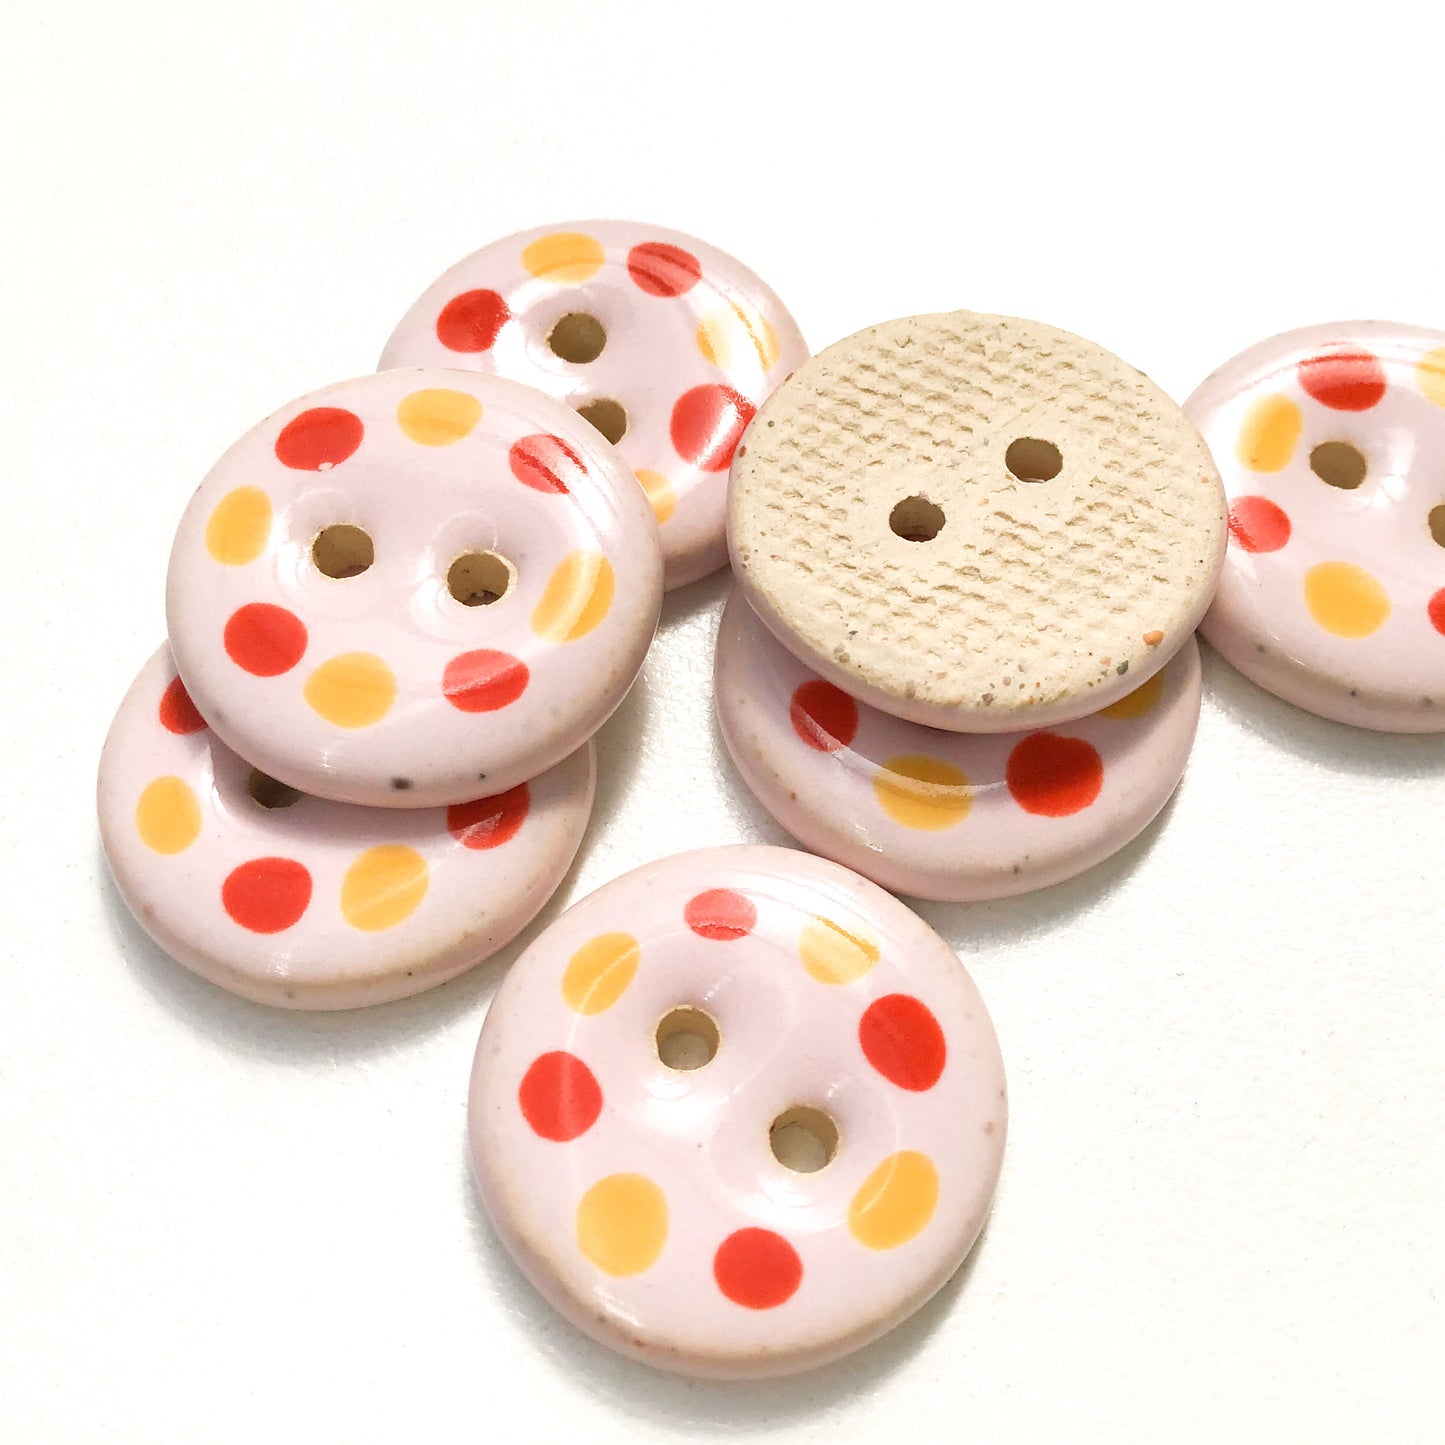 Pink Cobblestone Ceramic Buttons with Deep Orange & Yellow Dots - Pink Clay Buttons - 3/4" - 7 Pack